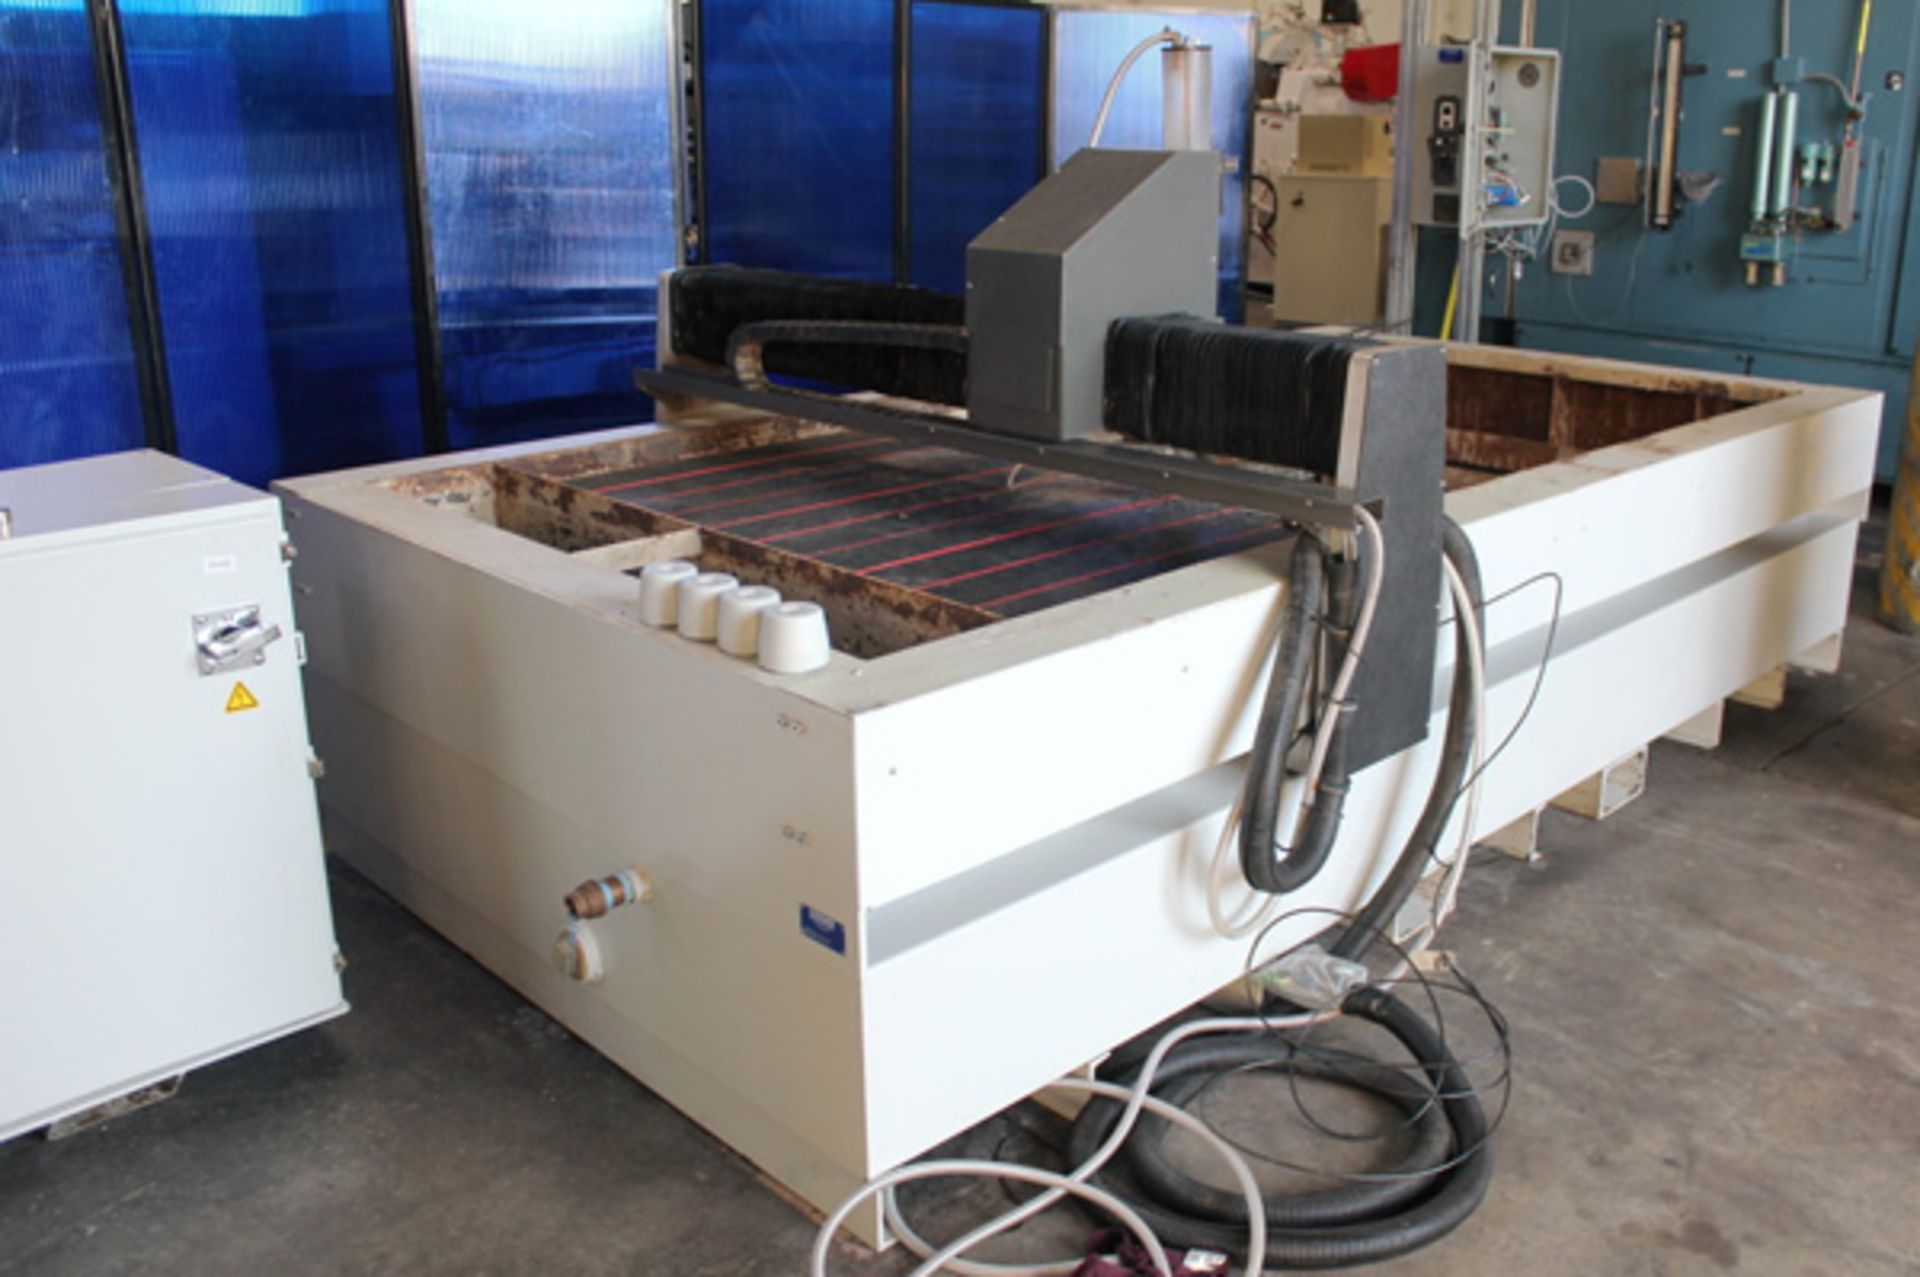 2013 Multicam CNC Water Jet | 120" x 60" x 3.5", Mdl: V-204, S/N: V-204-W09724 - 8446HP - Image 5 of 23